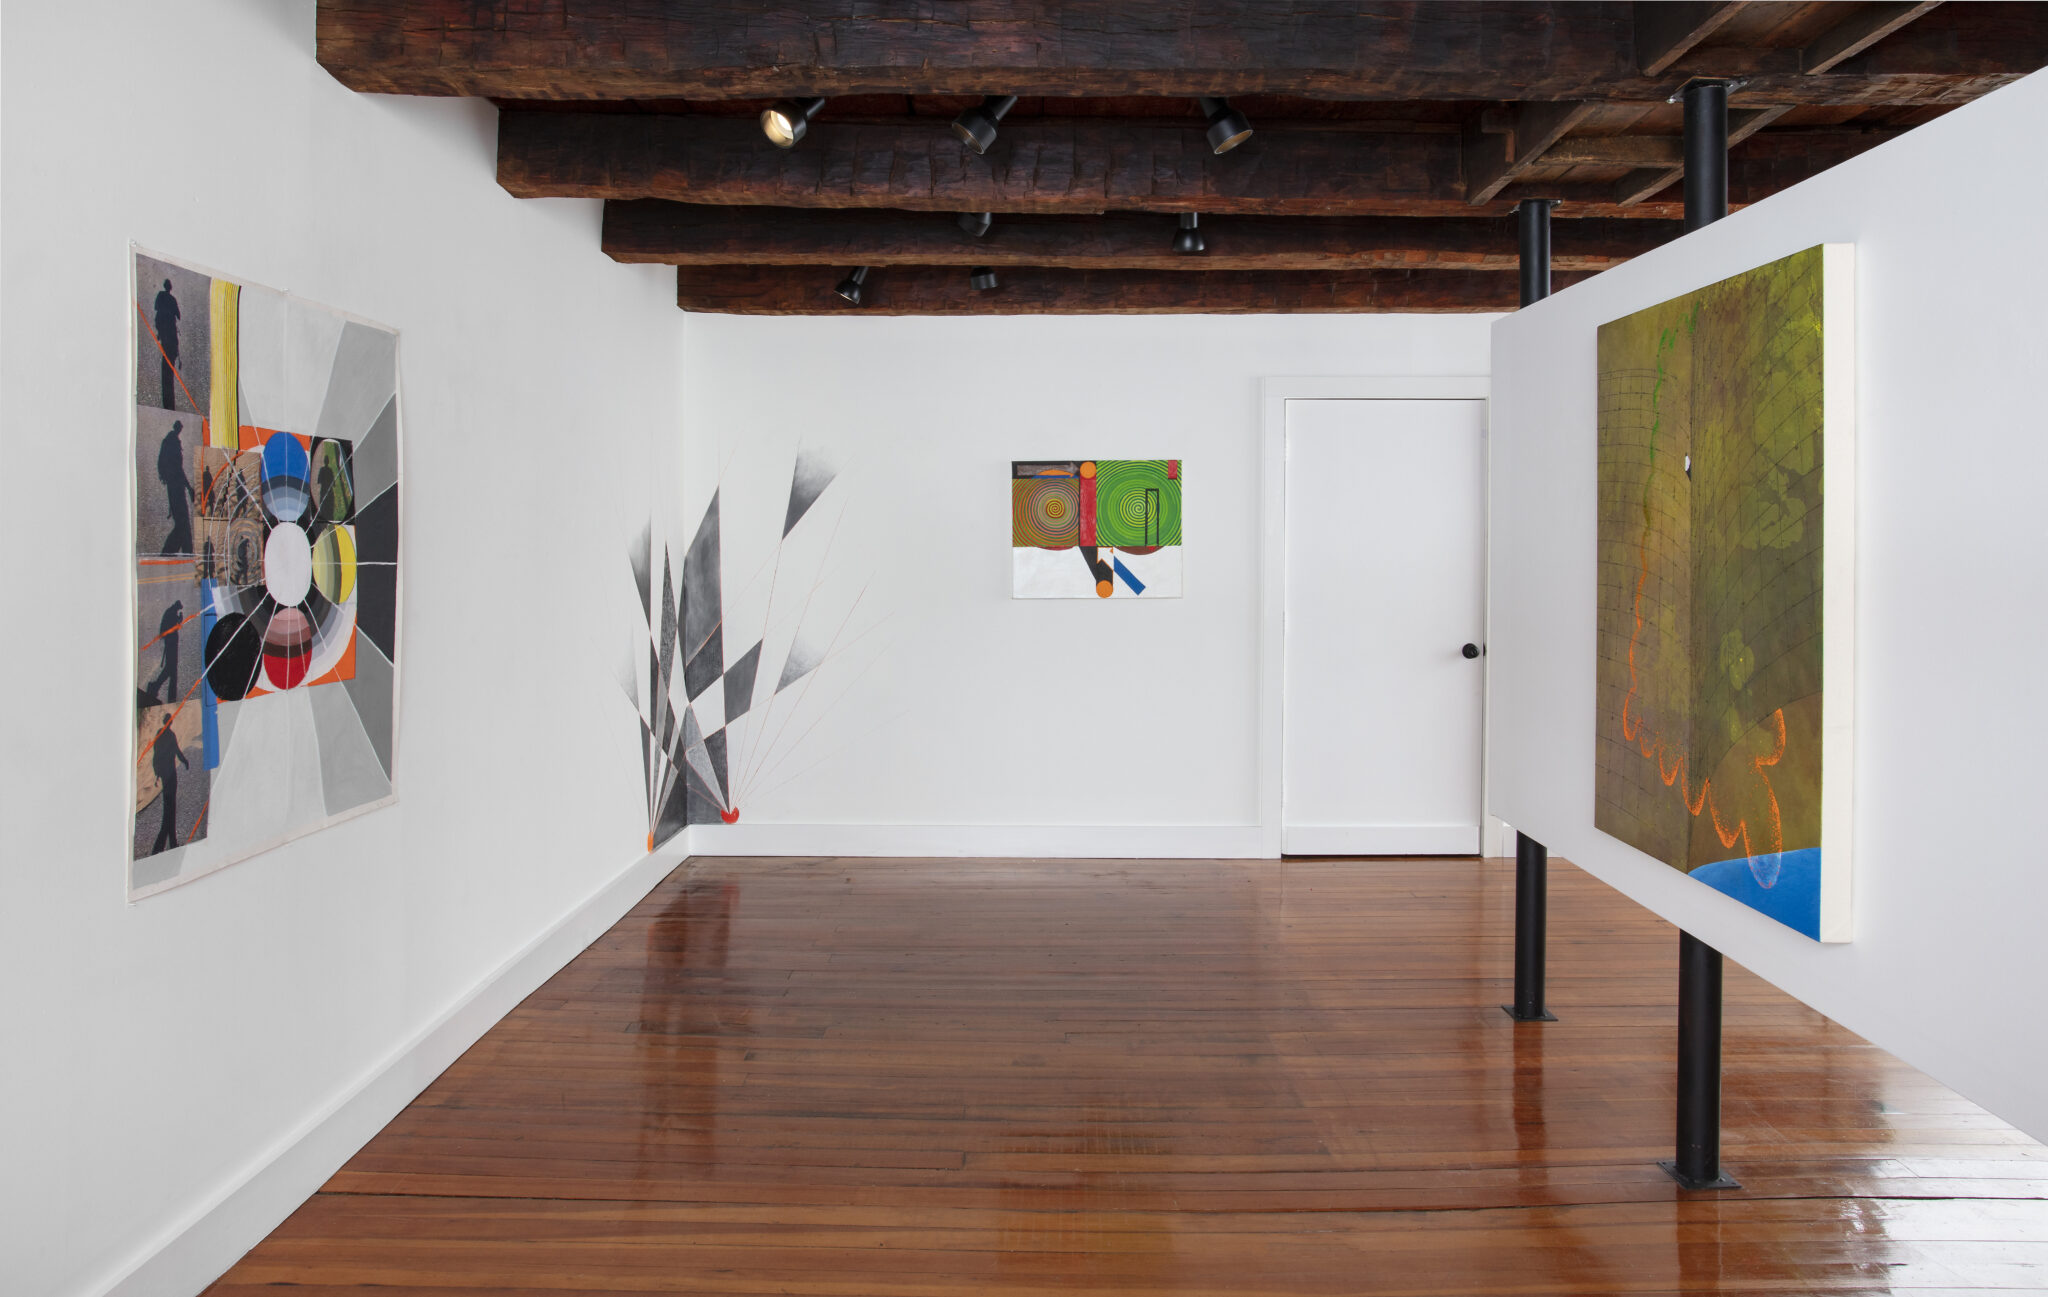 Installation view, At Finger_s End, works by Michael Cuadrado and Rina Goldfield